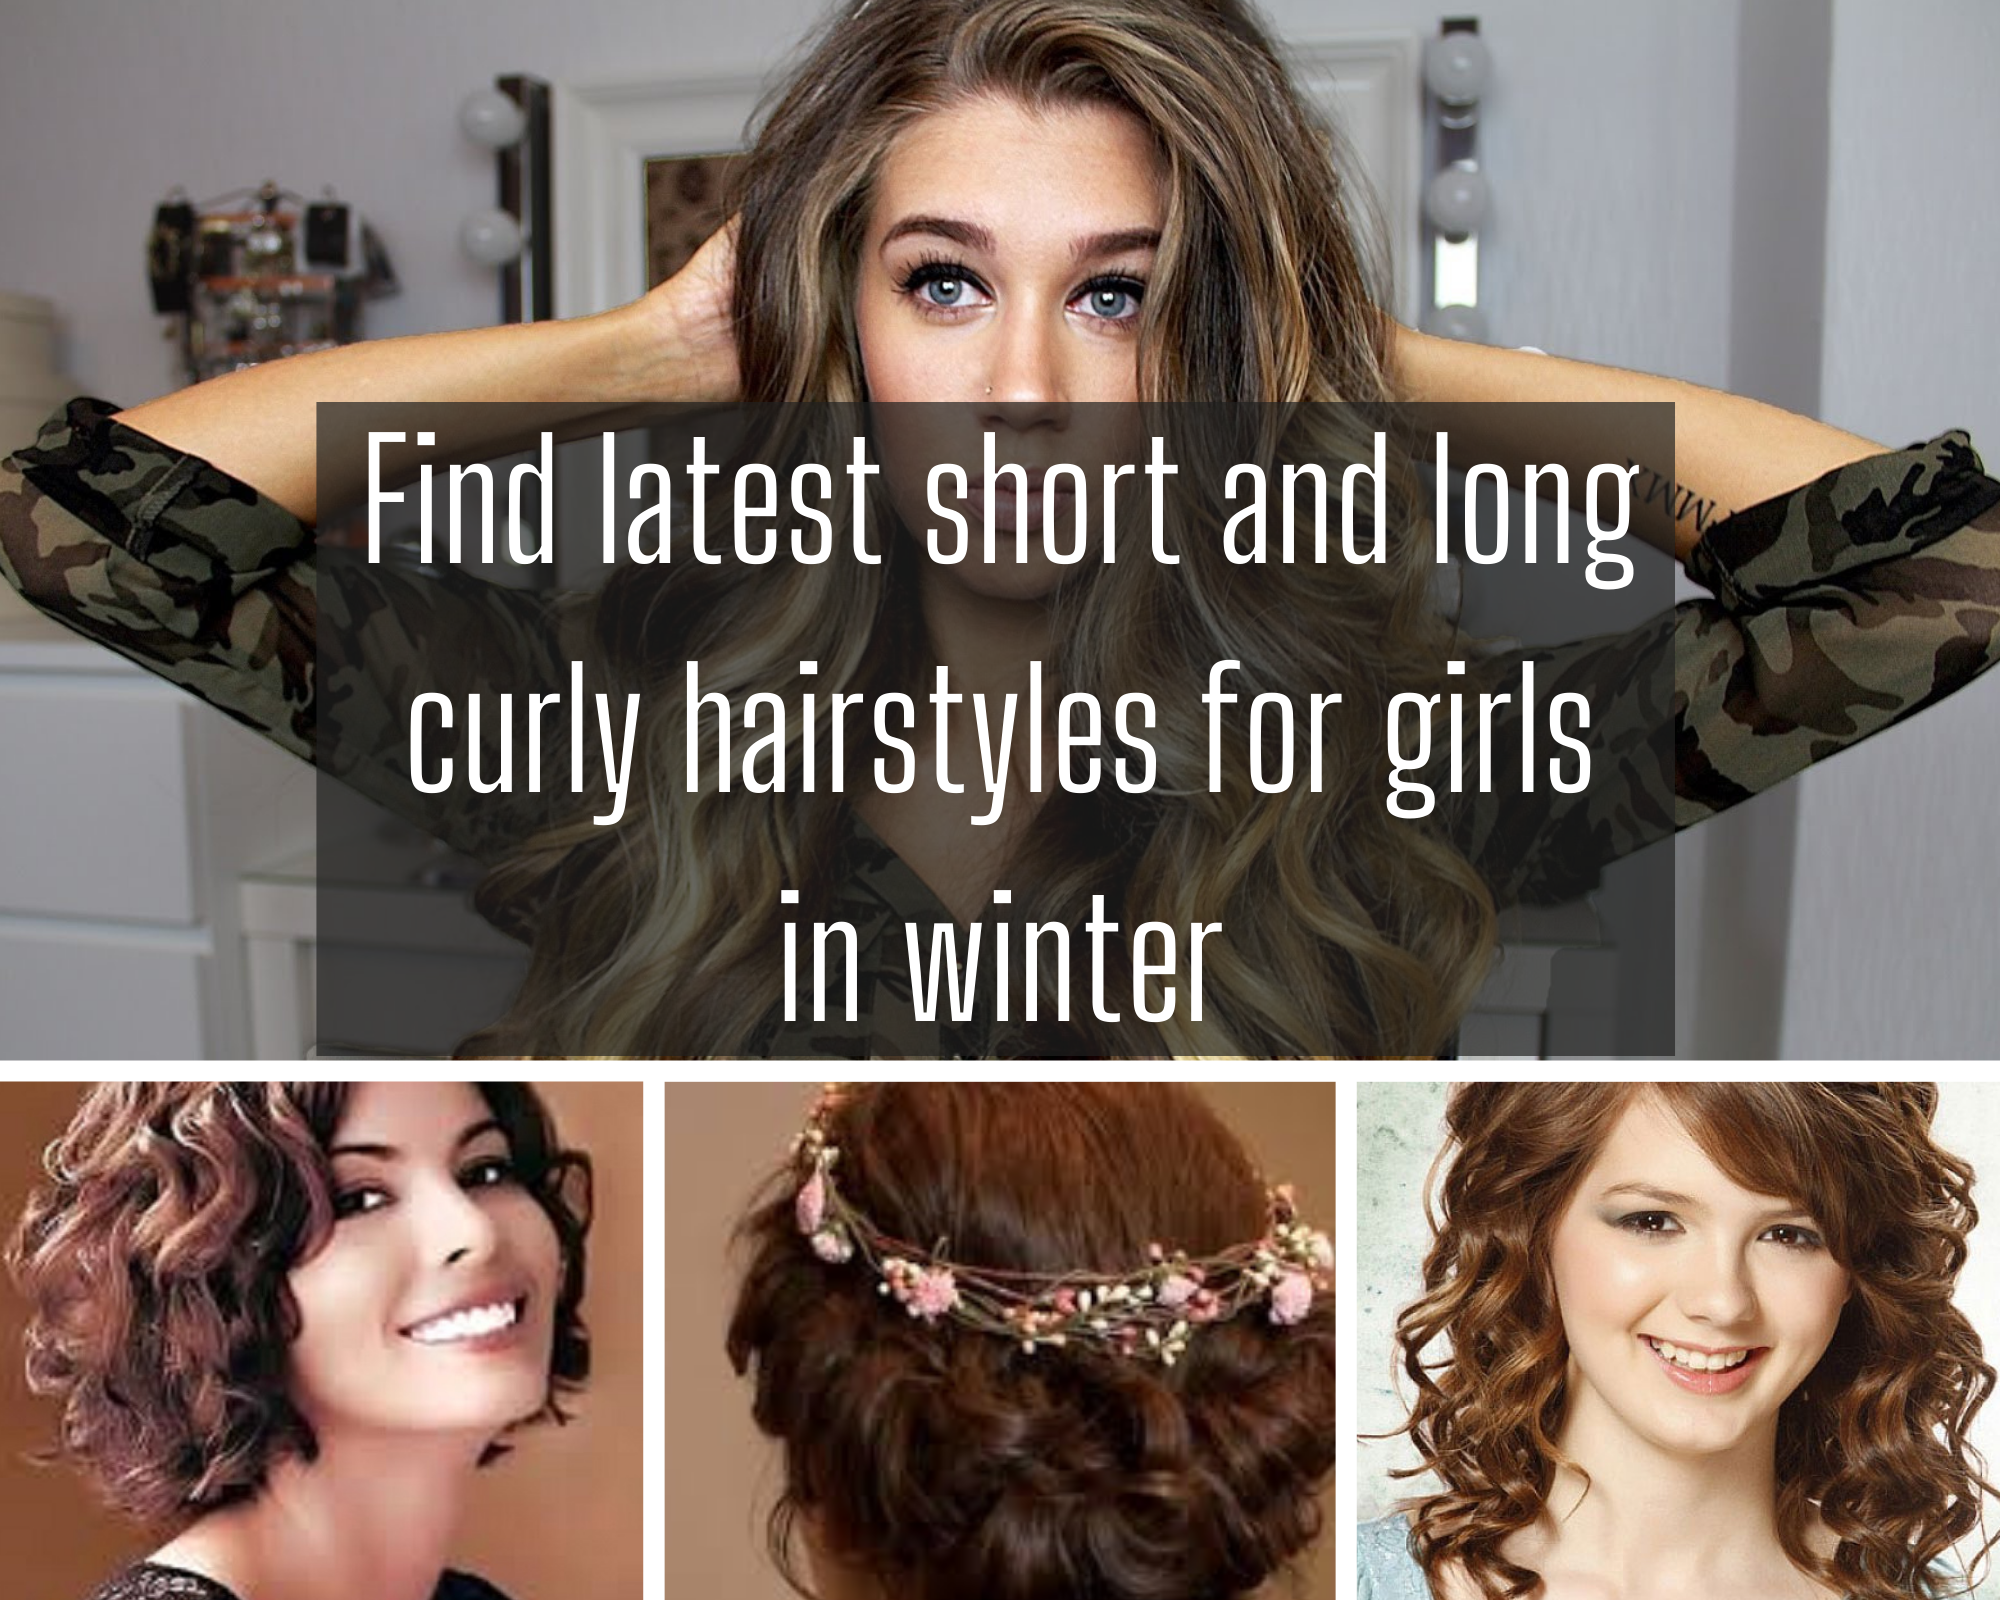 short and long curly hairstyles for girls in winter